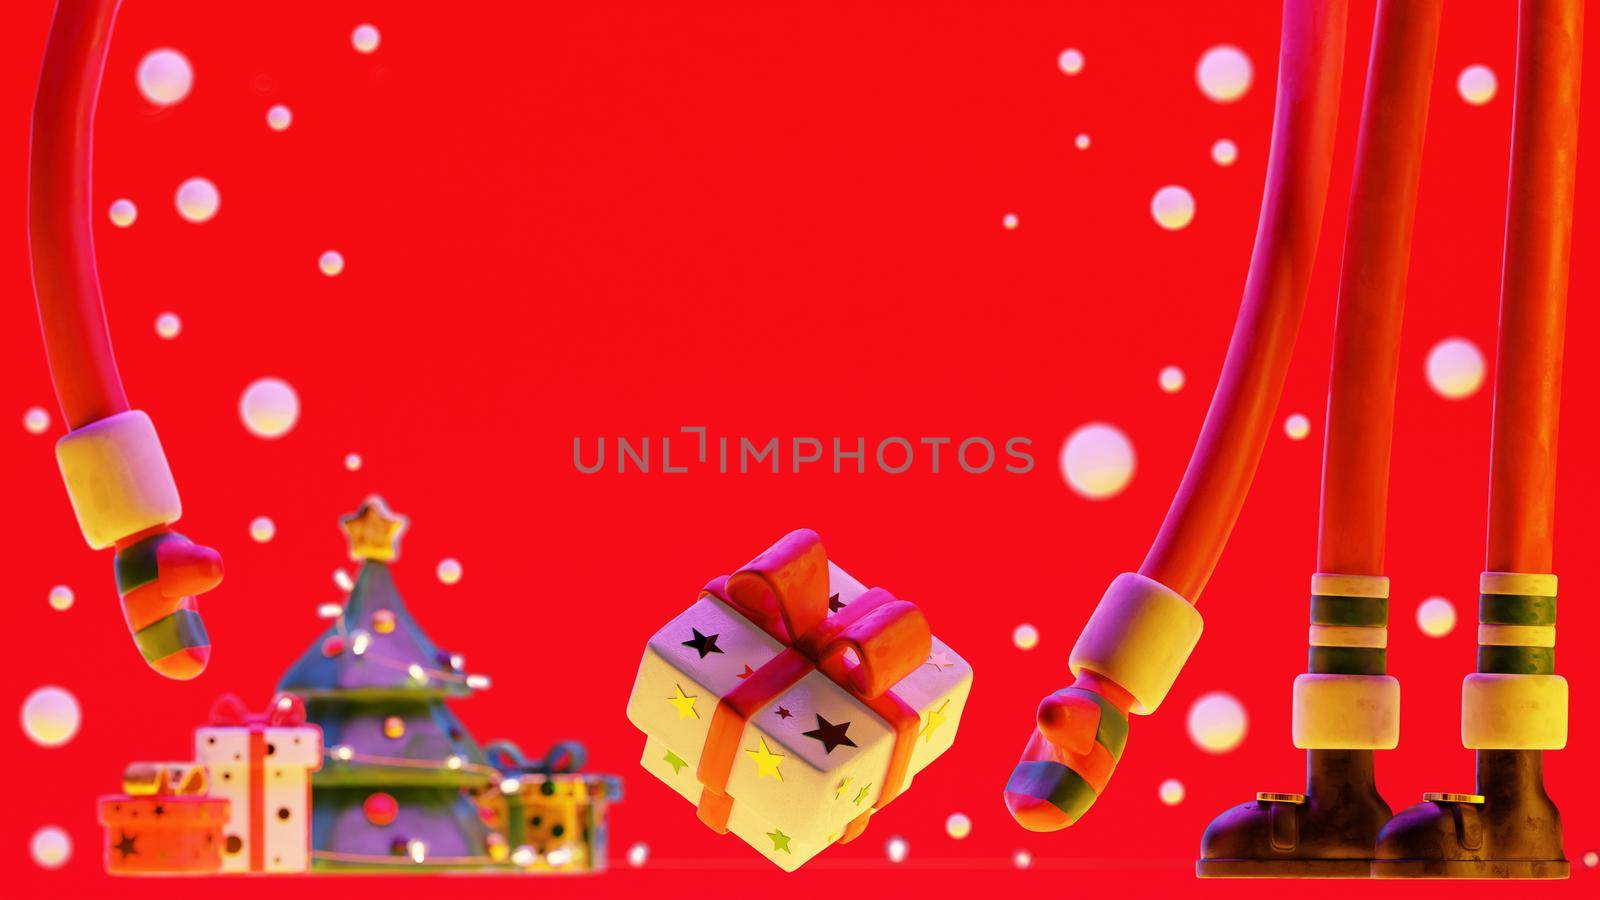 Santa Claus puts a gift under the Christmas tree. Christmas clay pop illustration. Clipping path included. 3d render template for holiday poster.